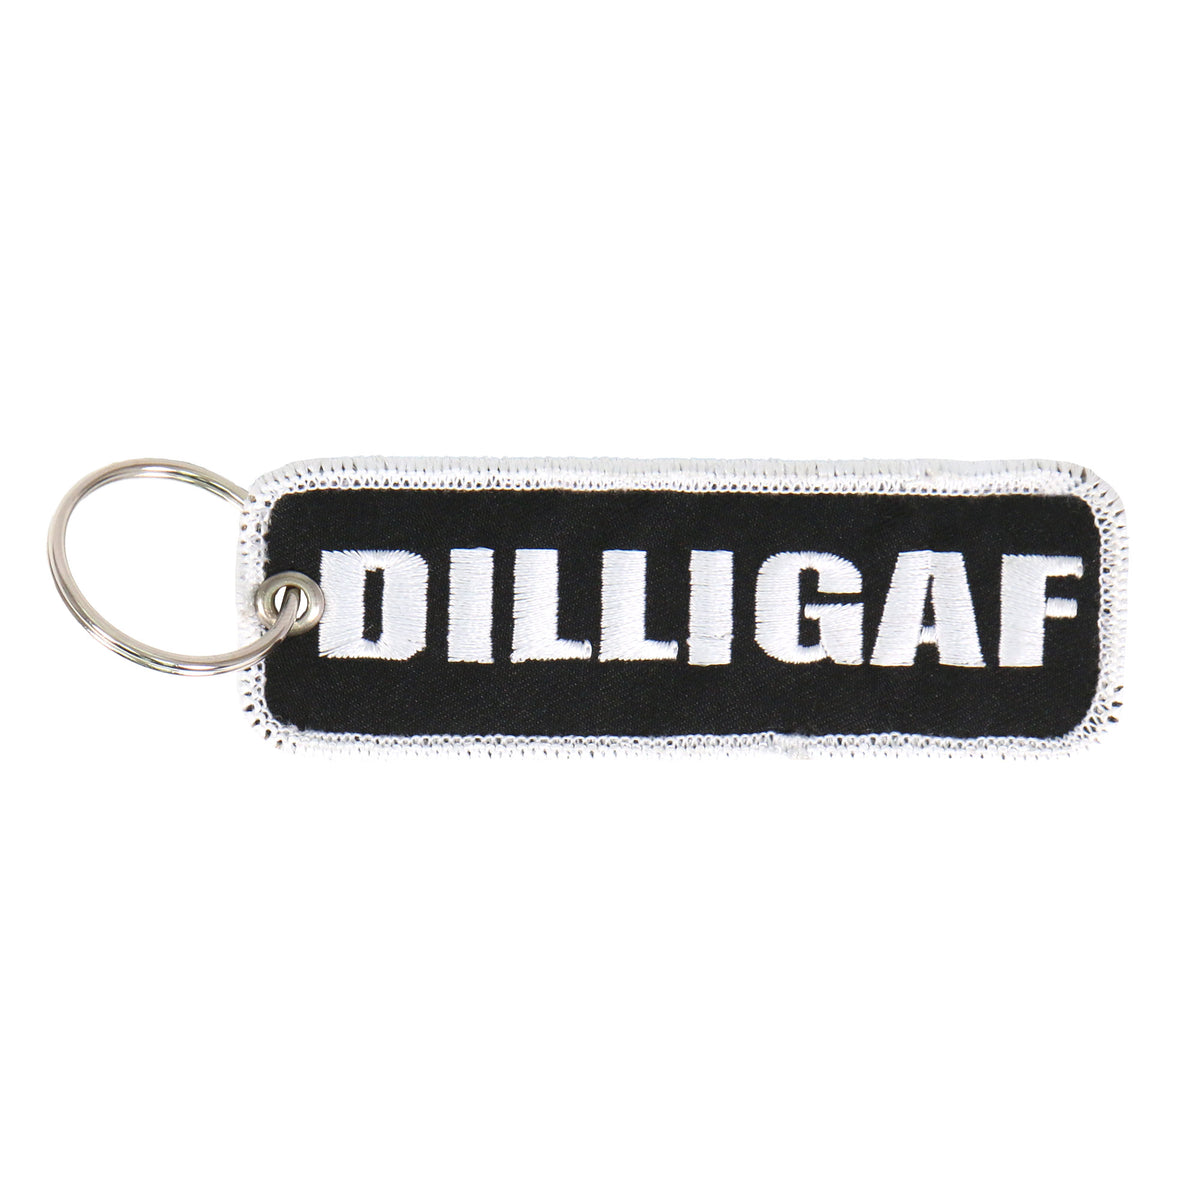 Hot Leathers KCH1030 DILLIGAF Embroidered Key Chain